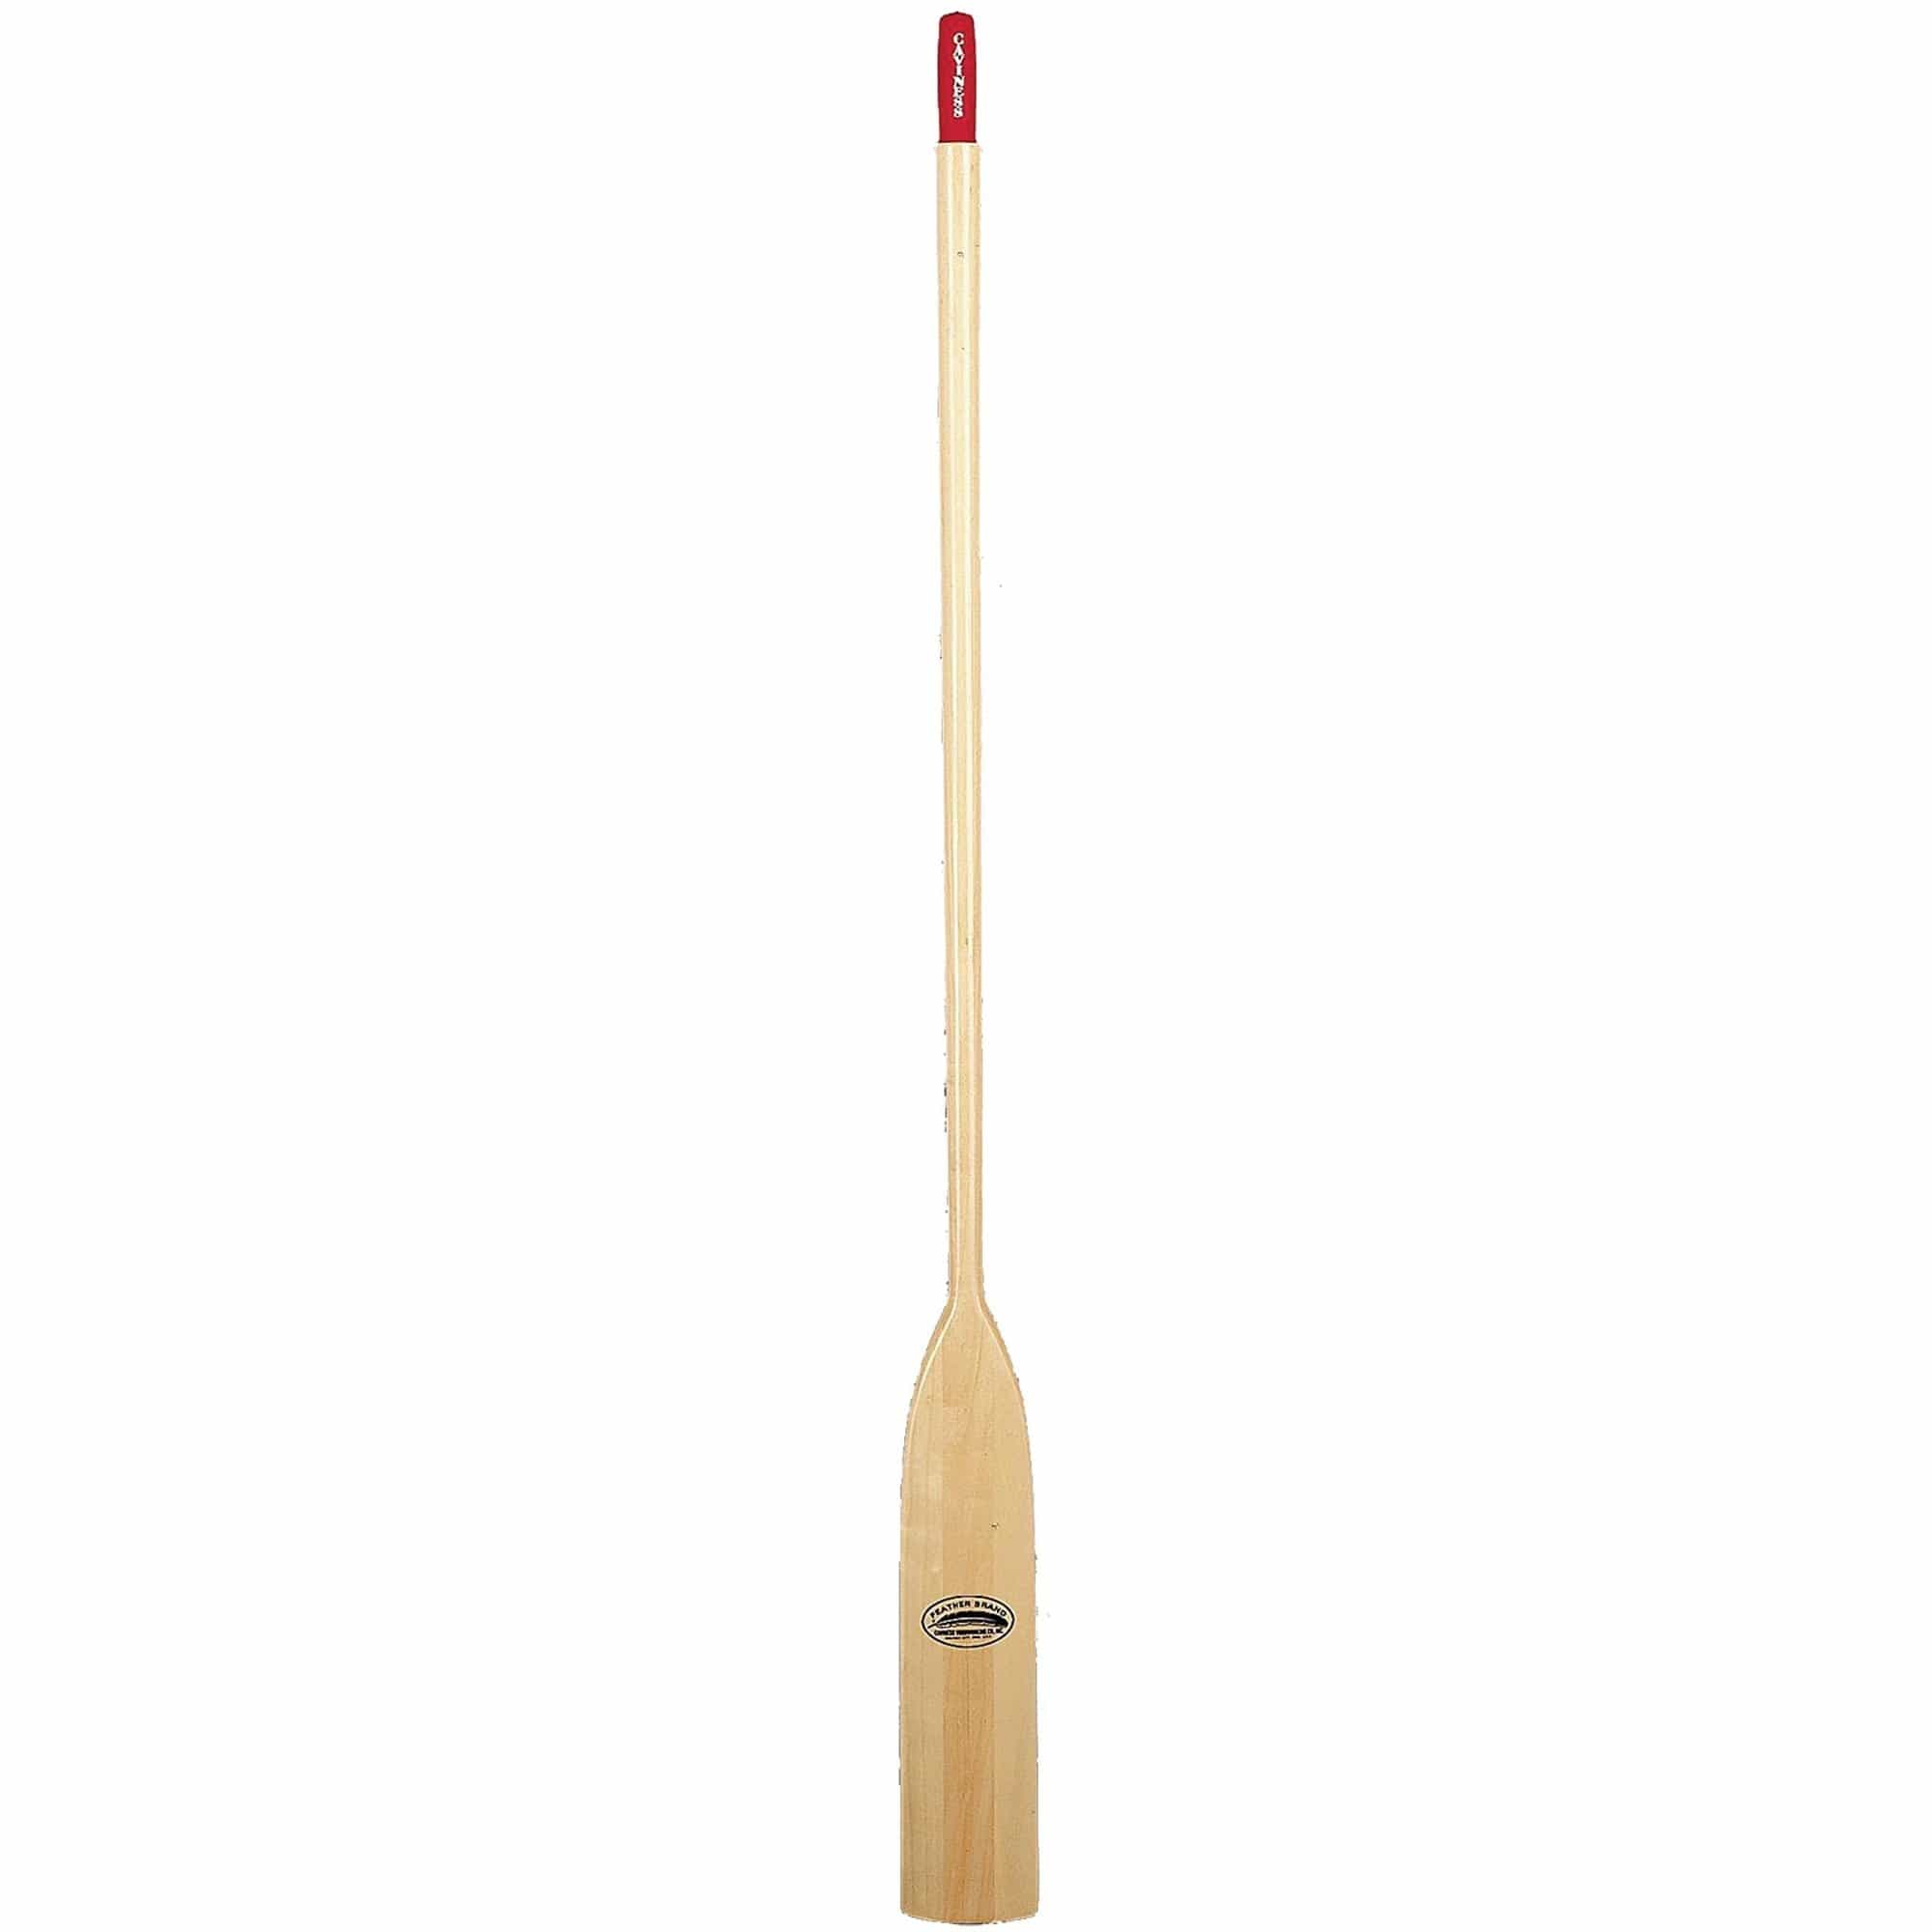 Caviness Marine/Water Sports : Paddles Caviness Lam With Grip Oar 6 foot